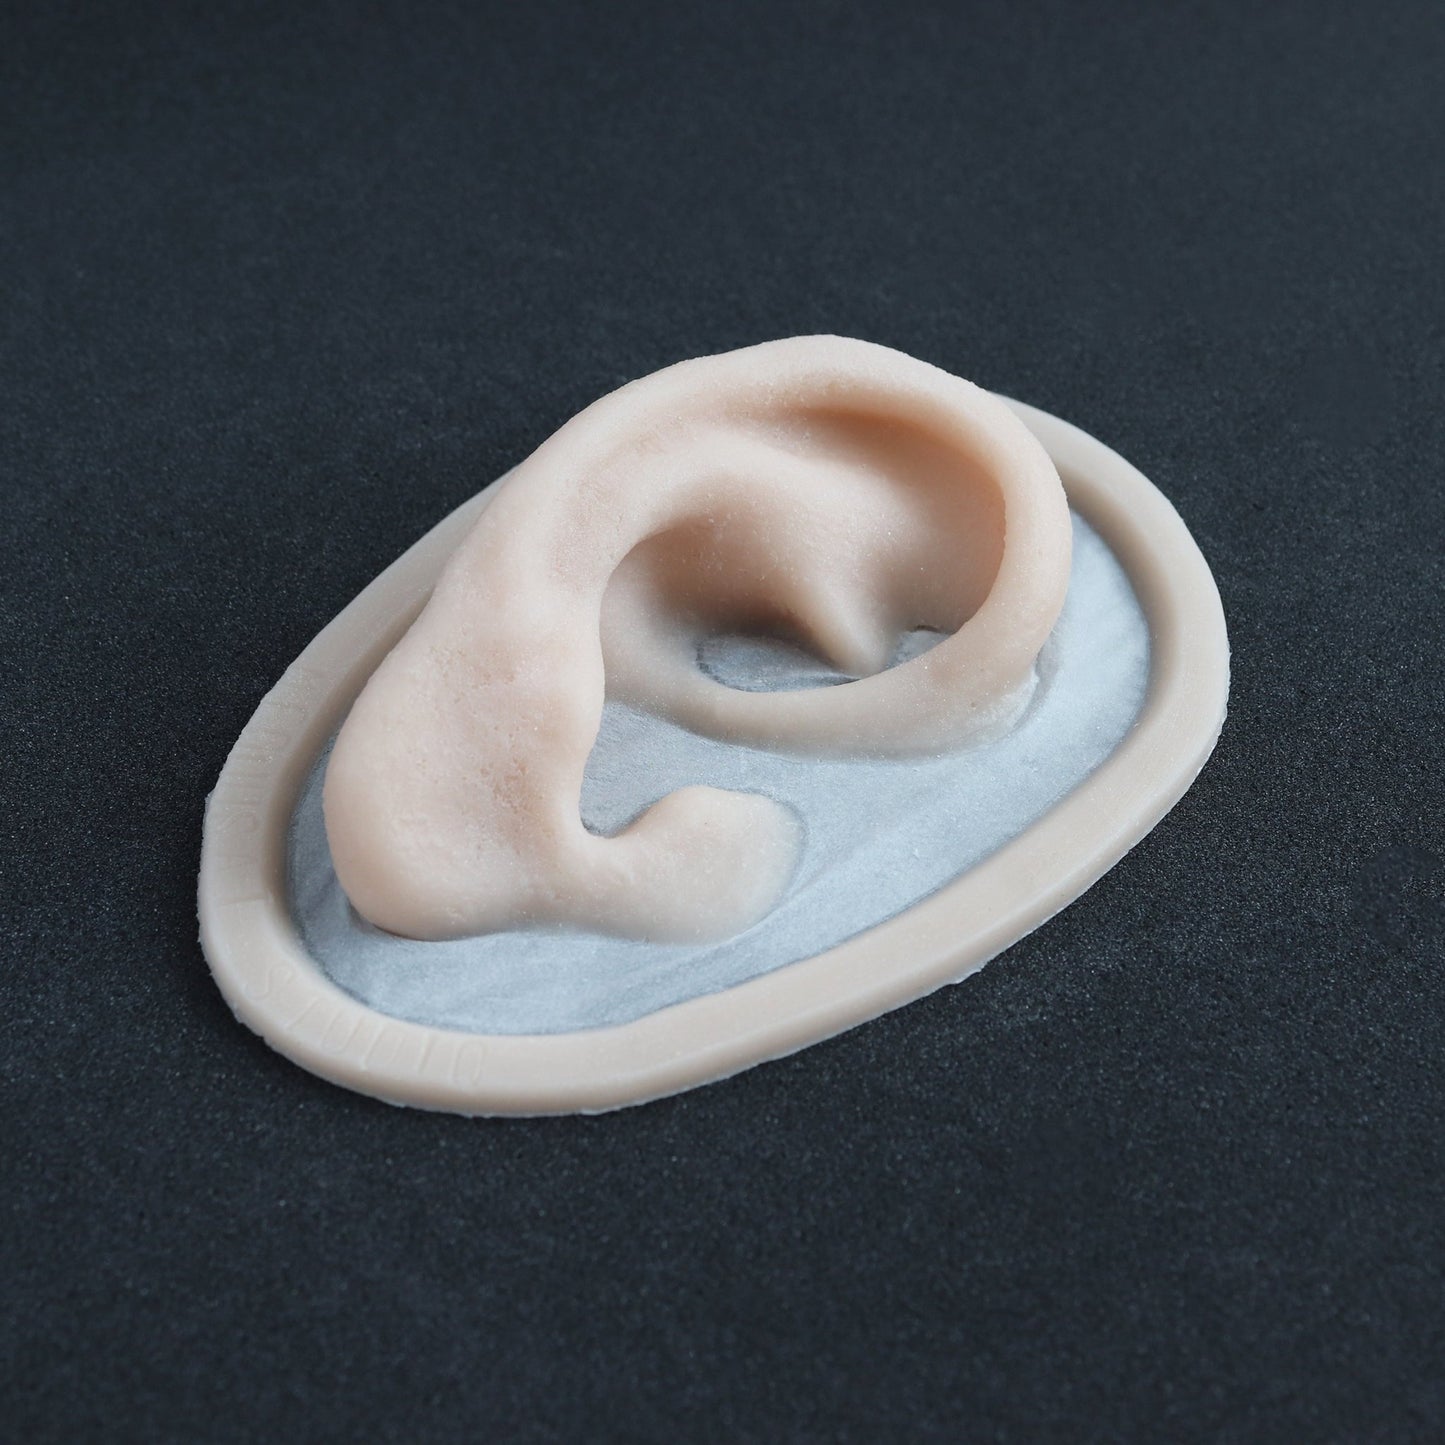 Extra Ears - Silicone makeup prosthetic in vanilla shade on a black surface